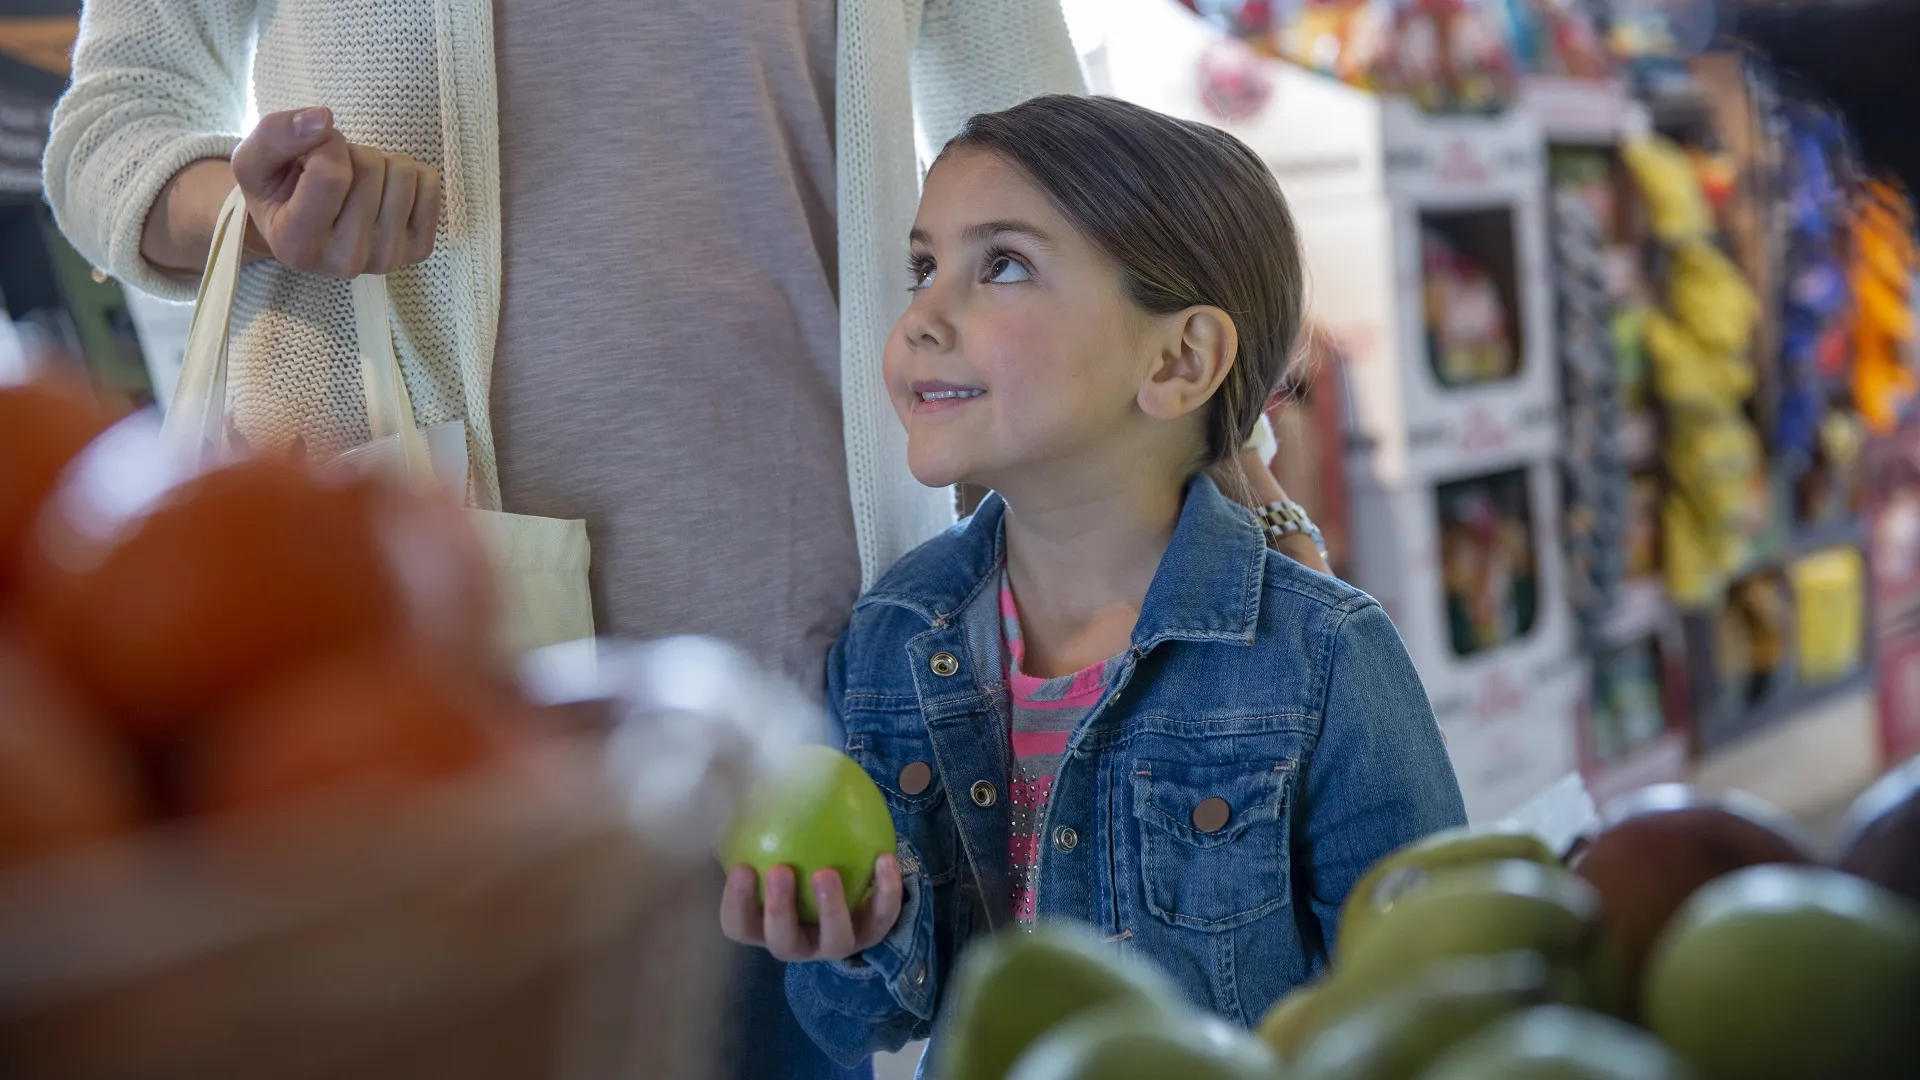 Smiling mother and daughter picking out produce in grocery store stock photo